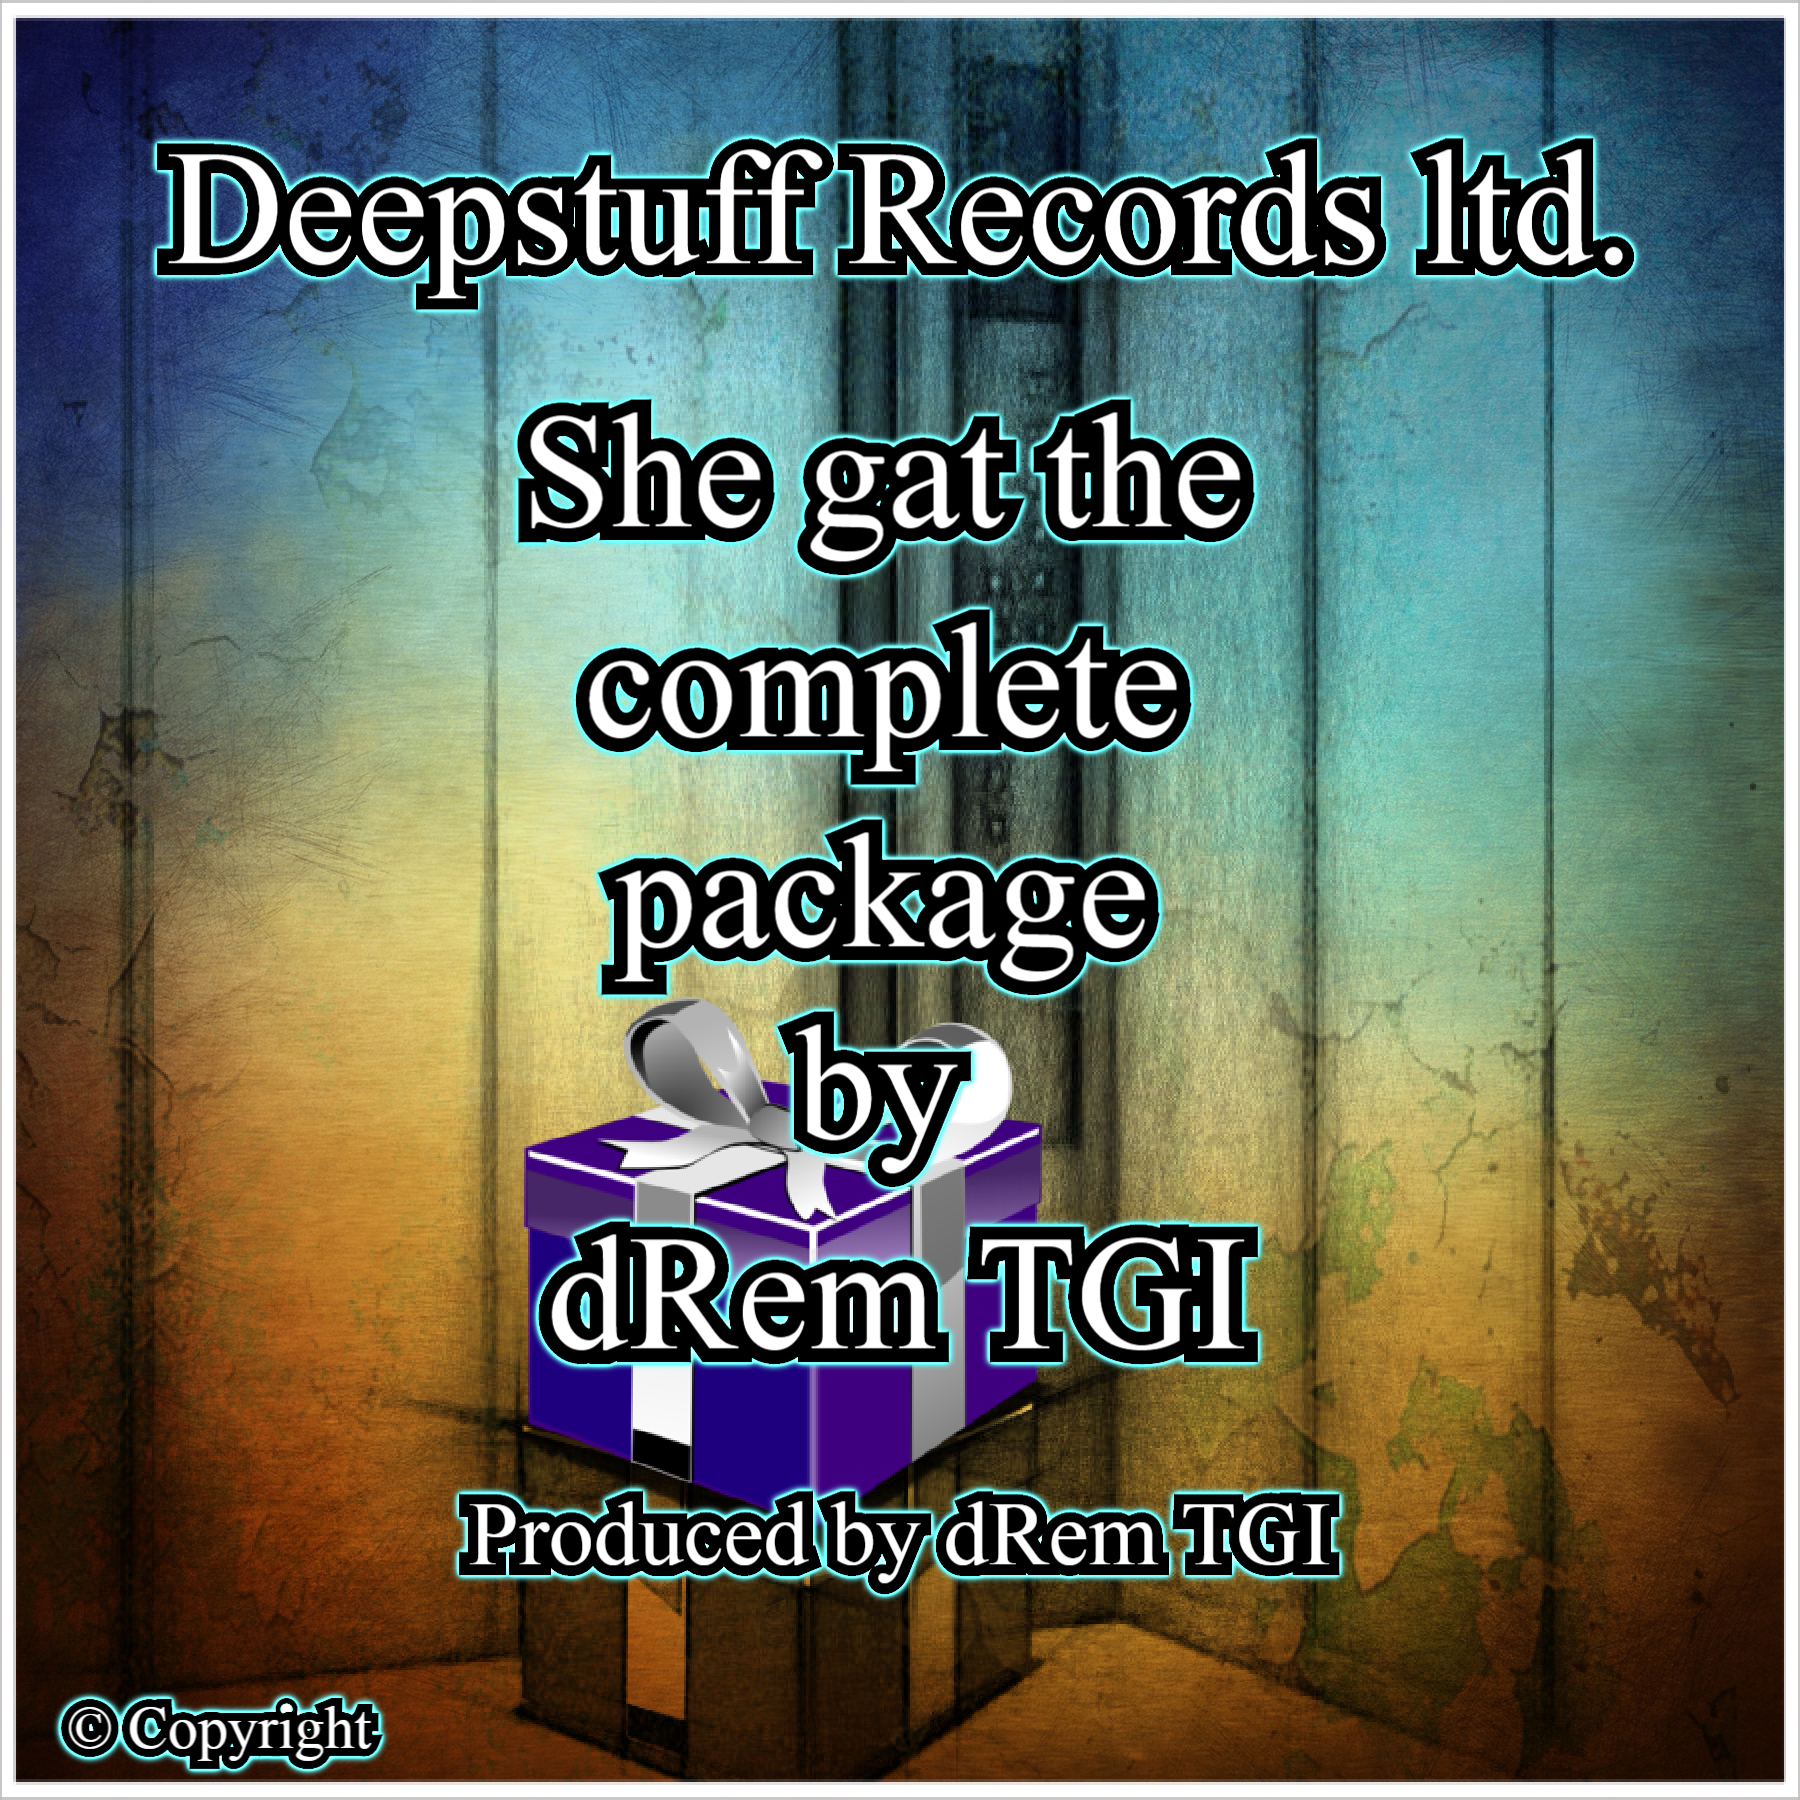 She gat the complete package (Single) by dRem TGI